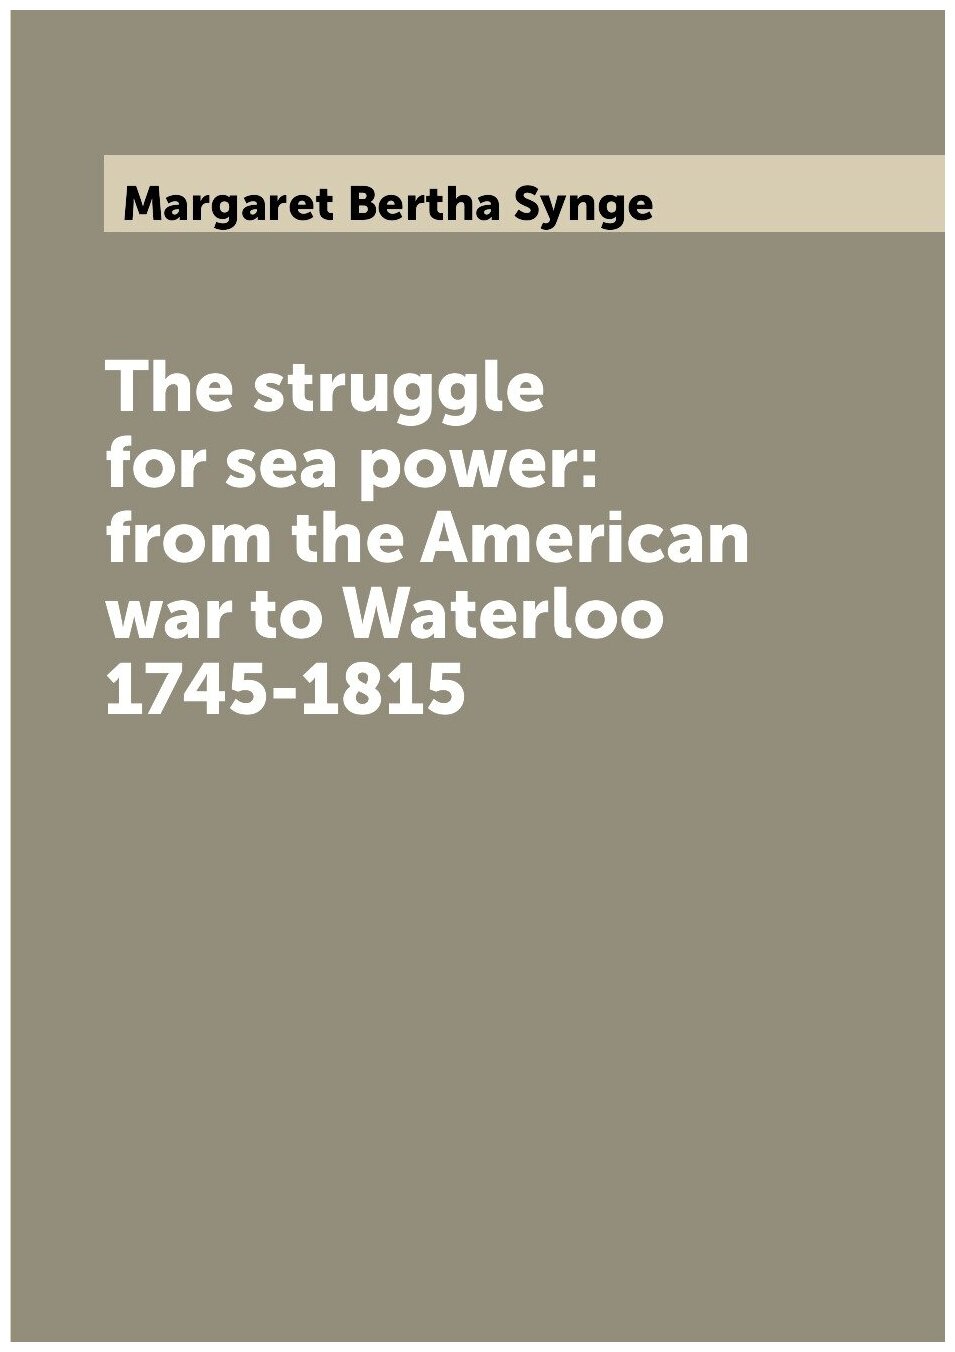 The struggle for sea power: from the American war to Waterloo 1745-1815